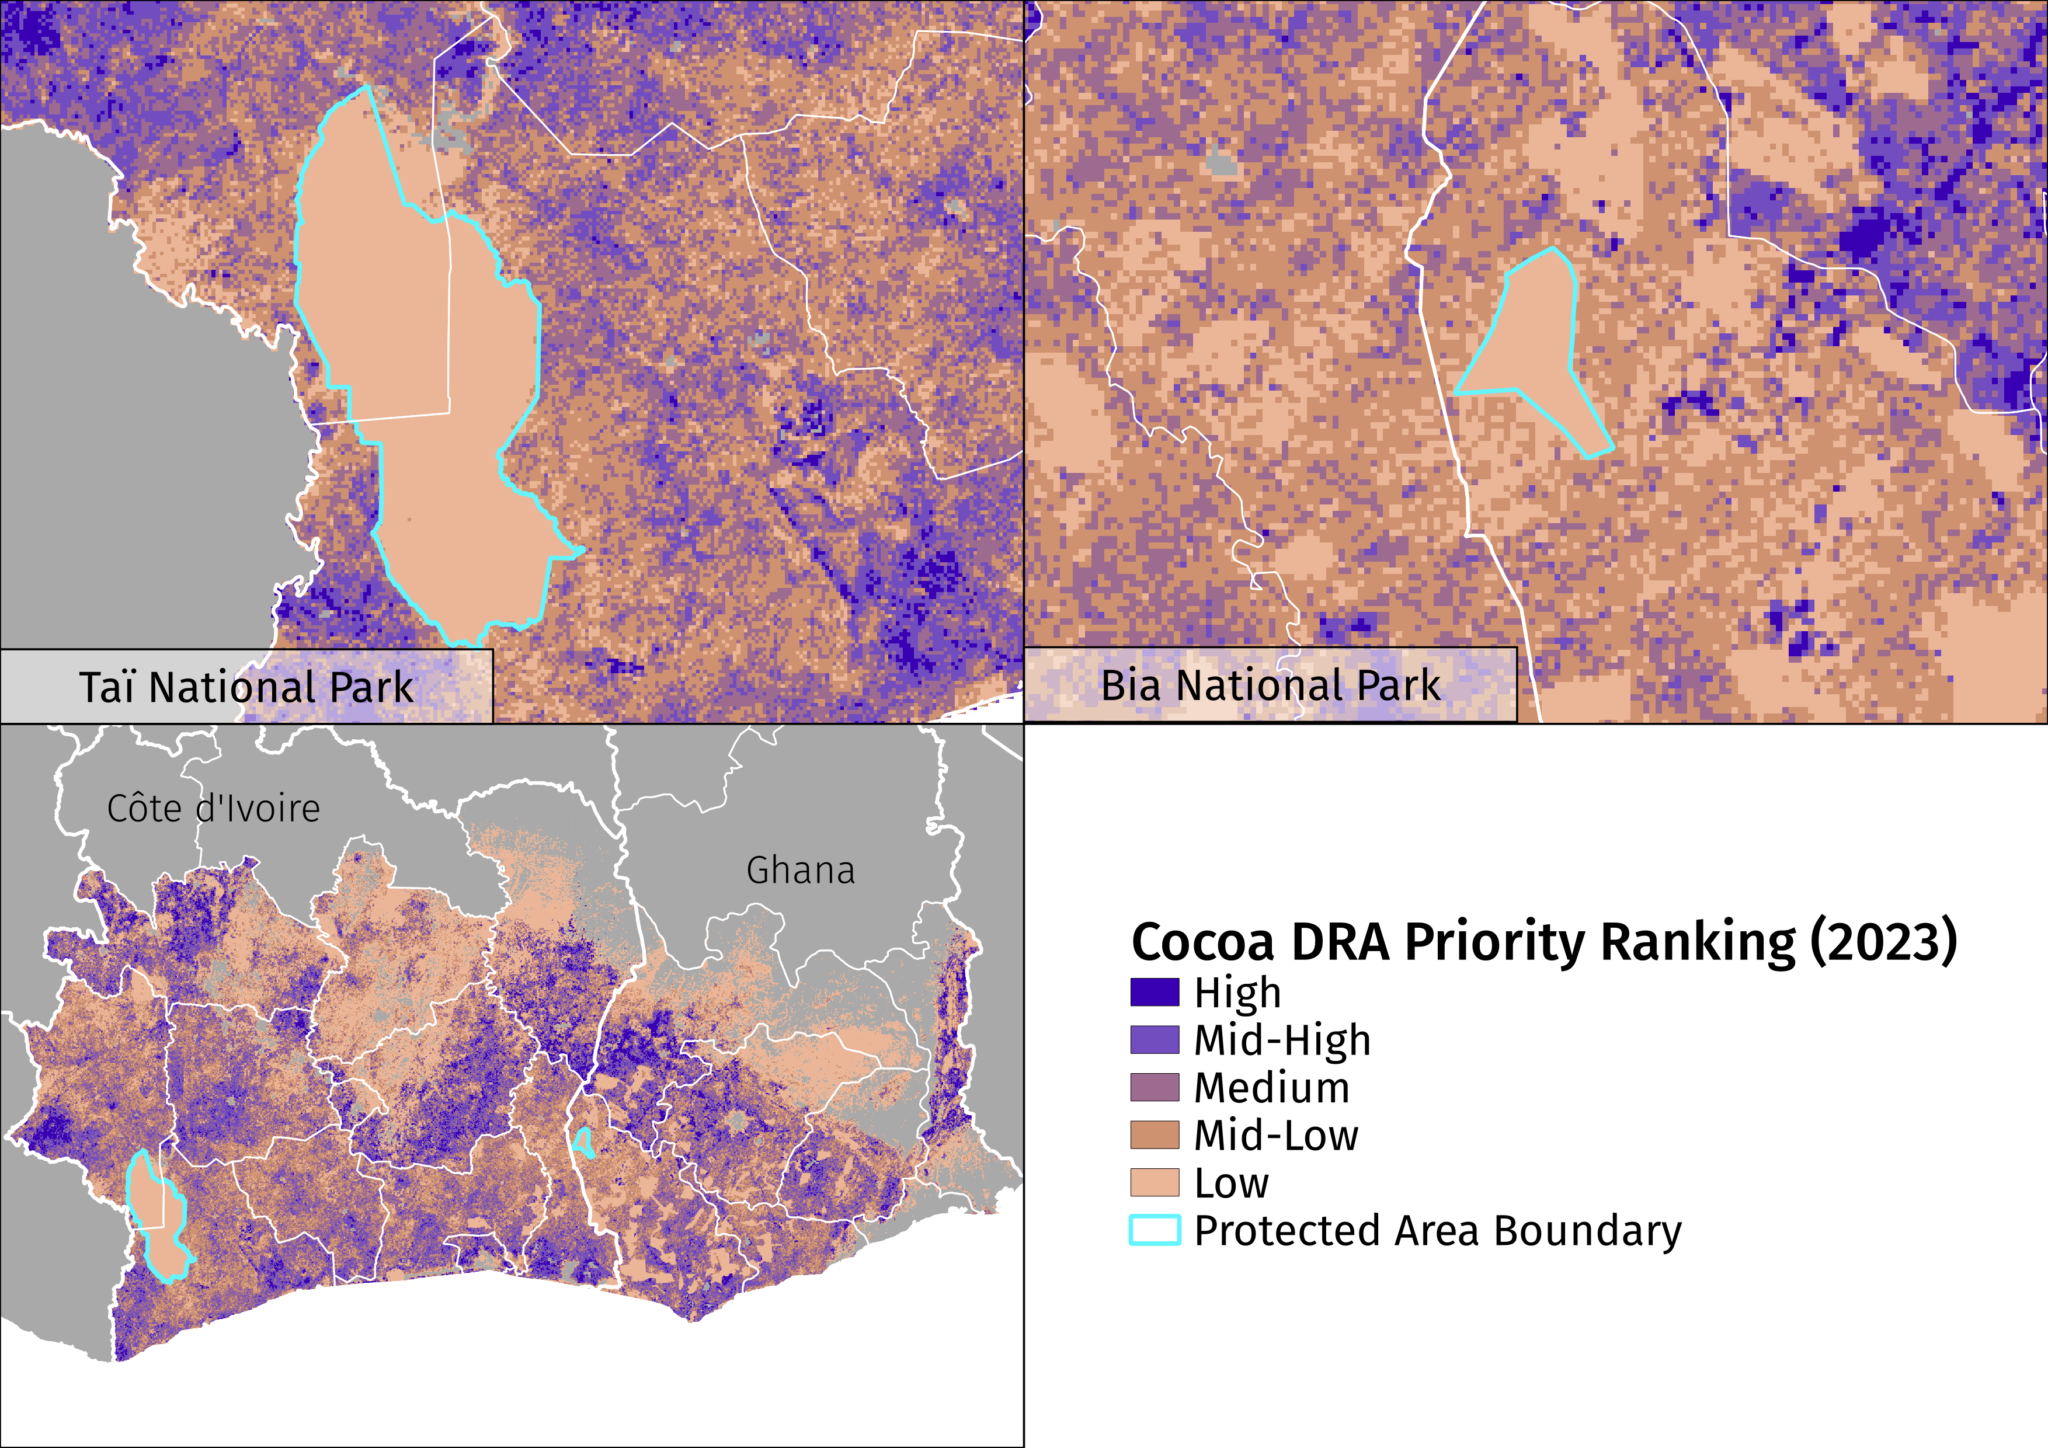 Cocoa deforestation risk assessment priority ranking map (2023) showing protected areas